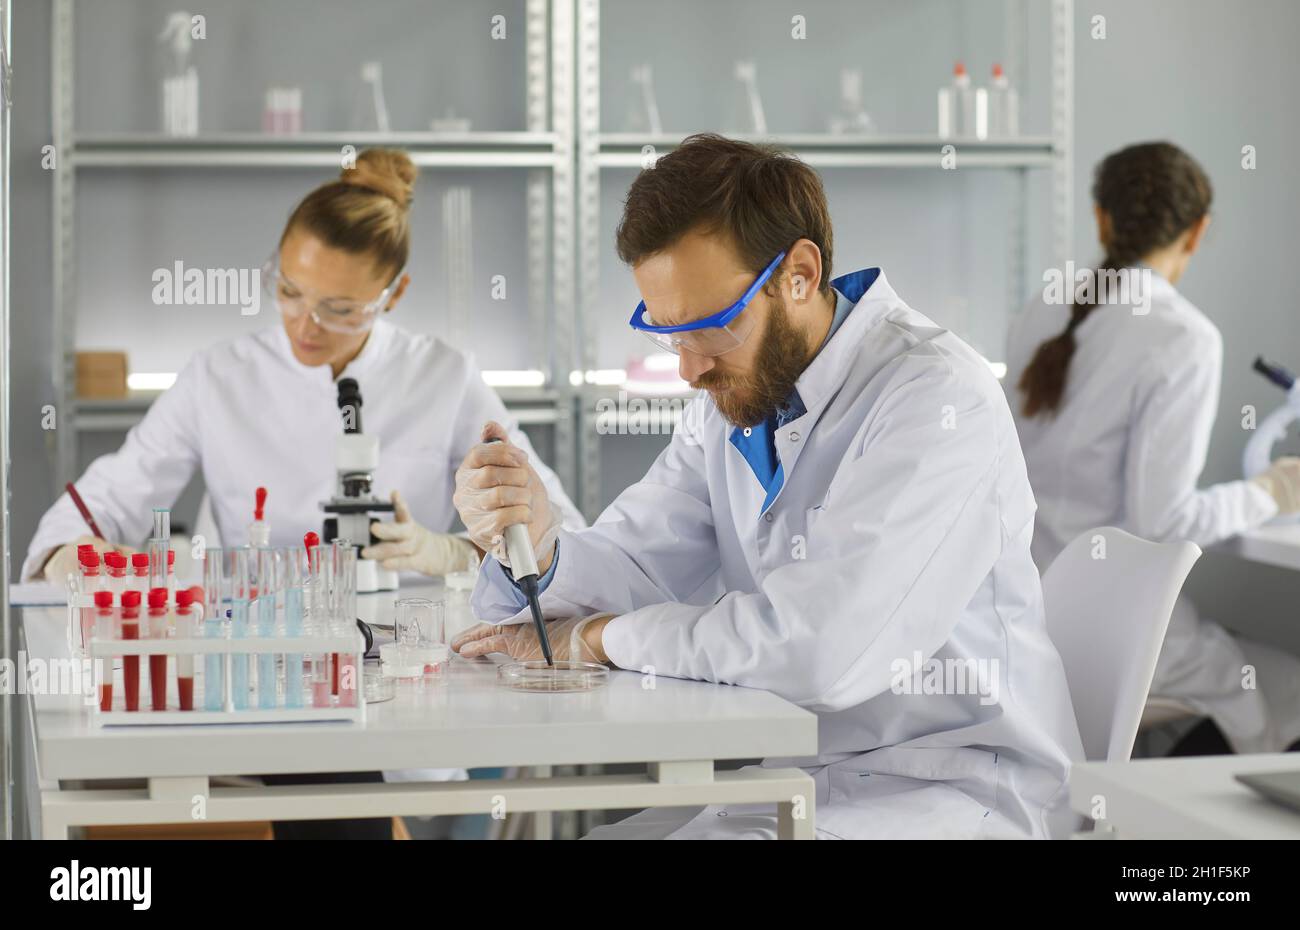 Portrait of three scientists doing research studying substances in modern laboratory Stock Photo